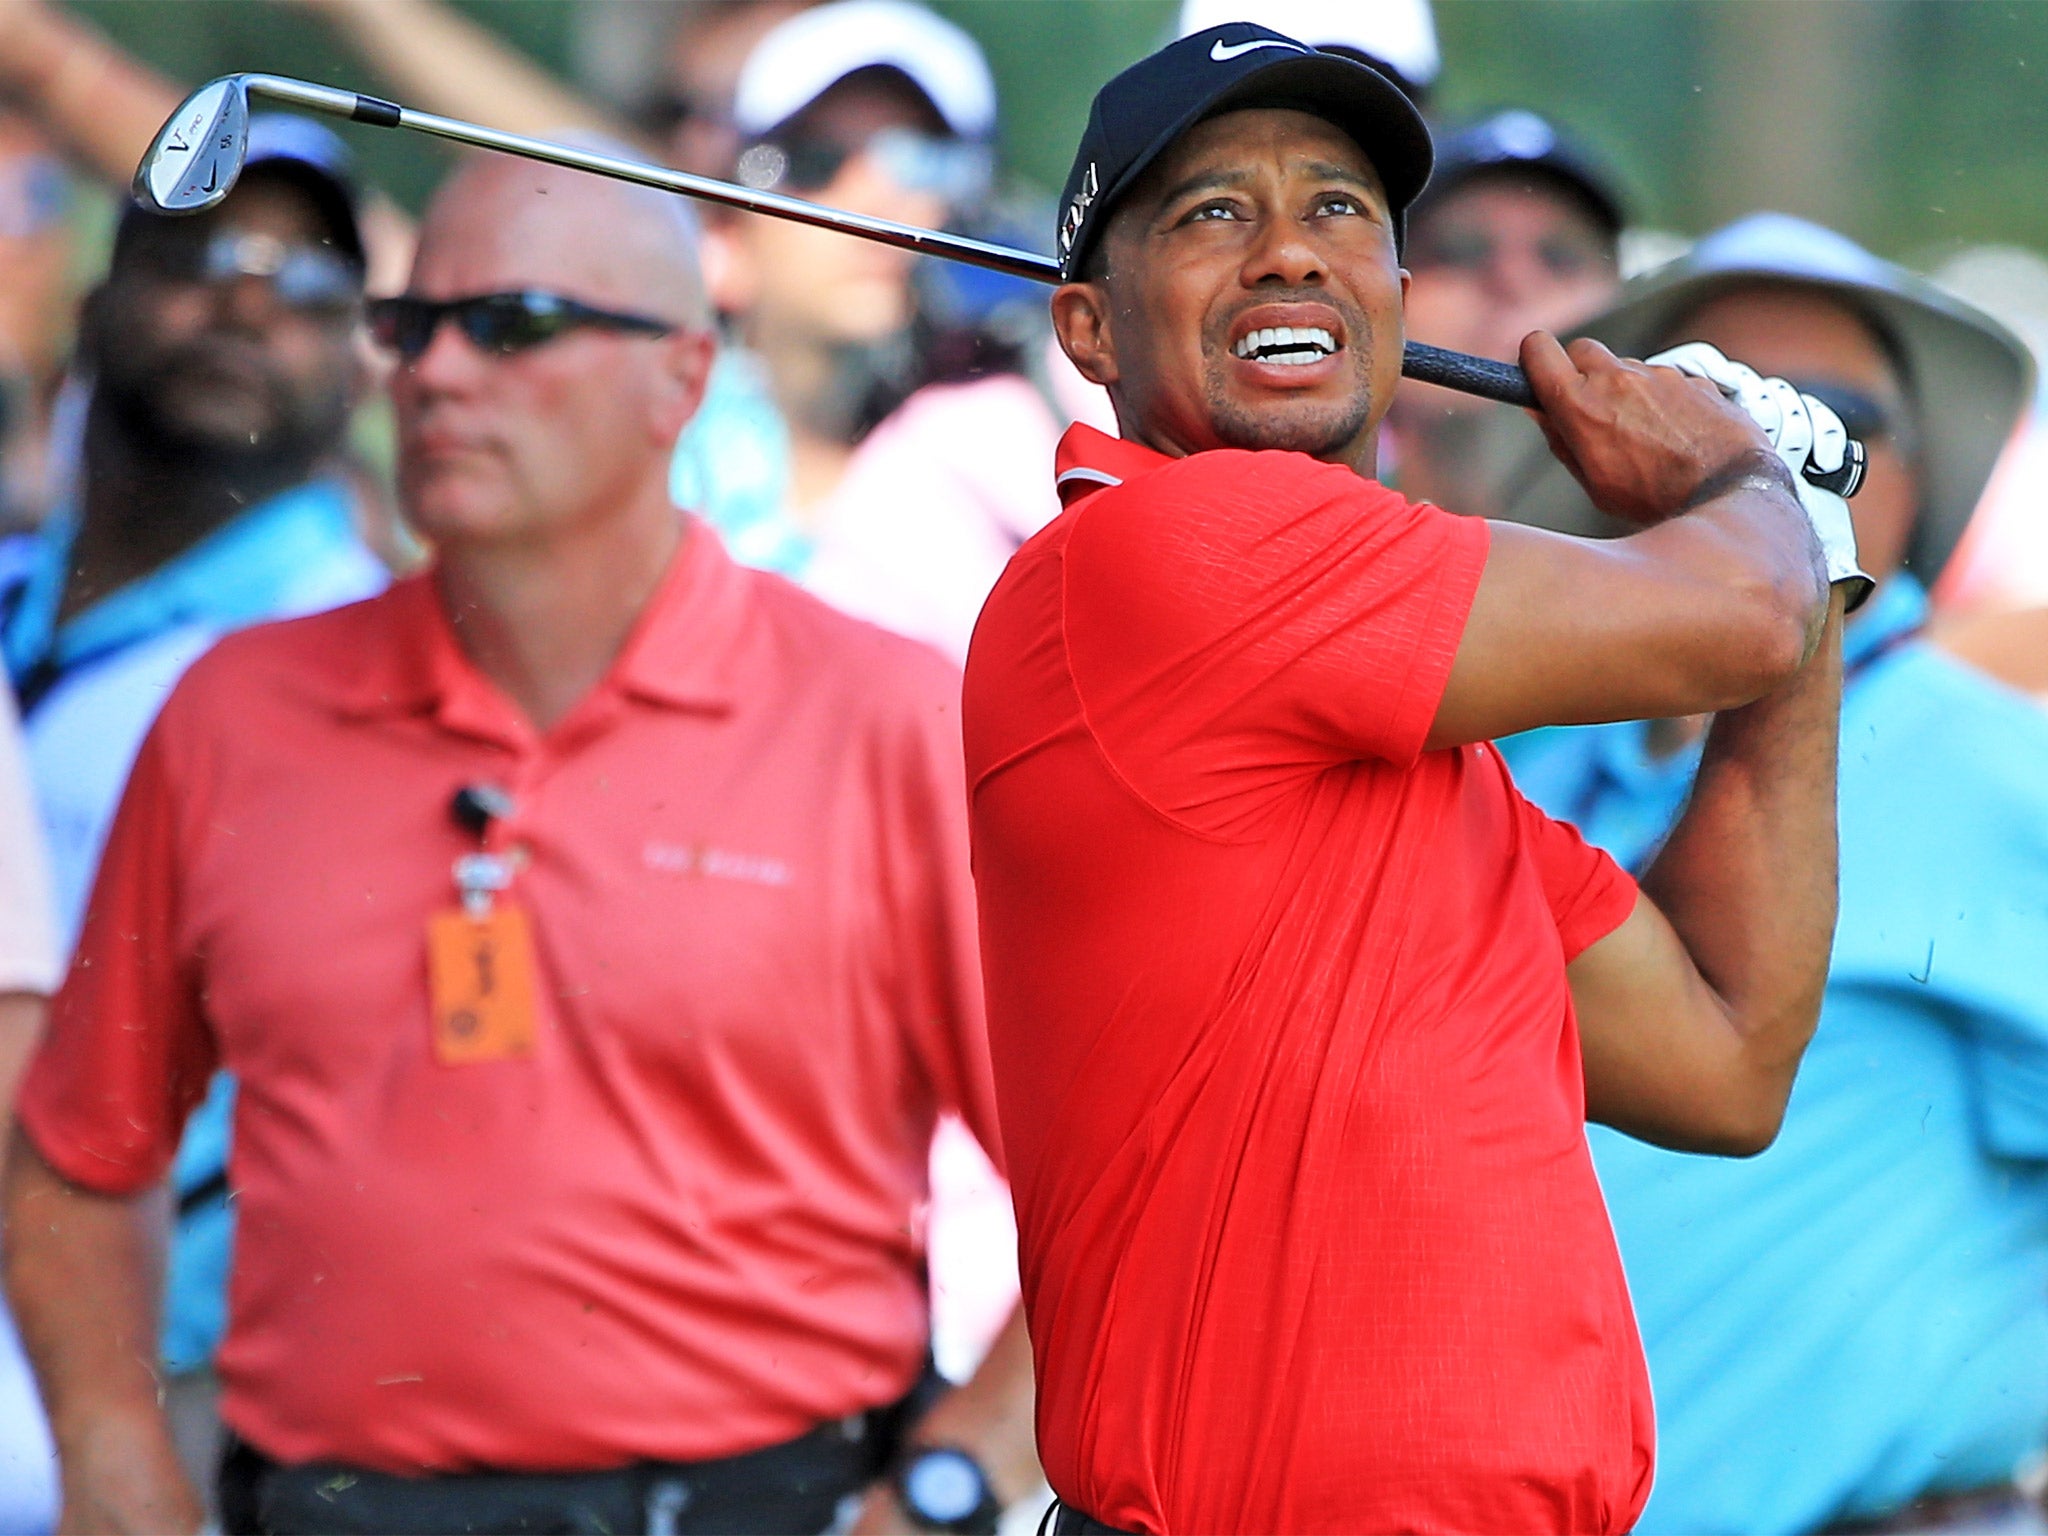 Tiger Woods on his way to victory at Sawgrass, his fourth win of the year